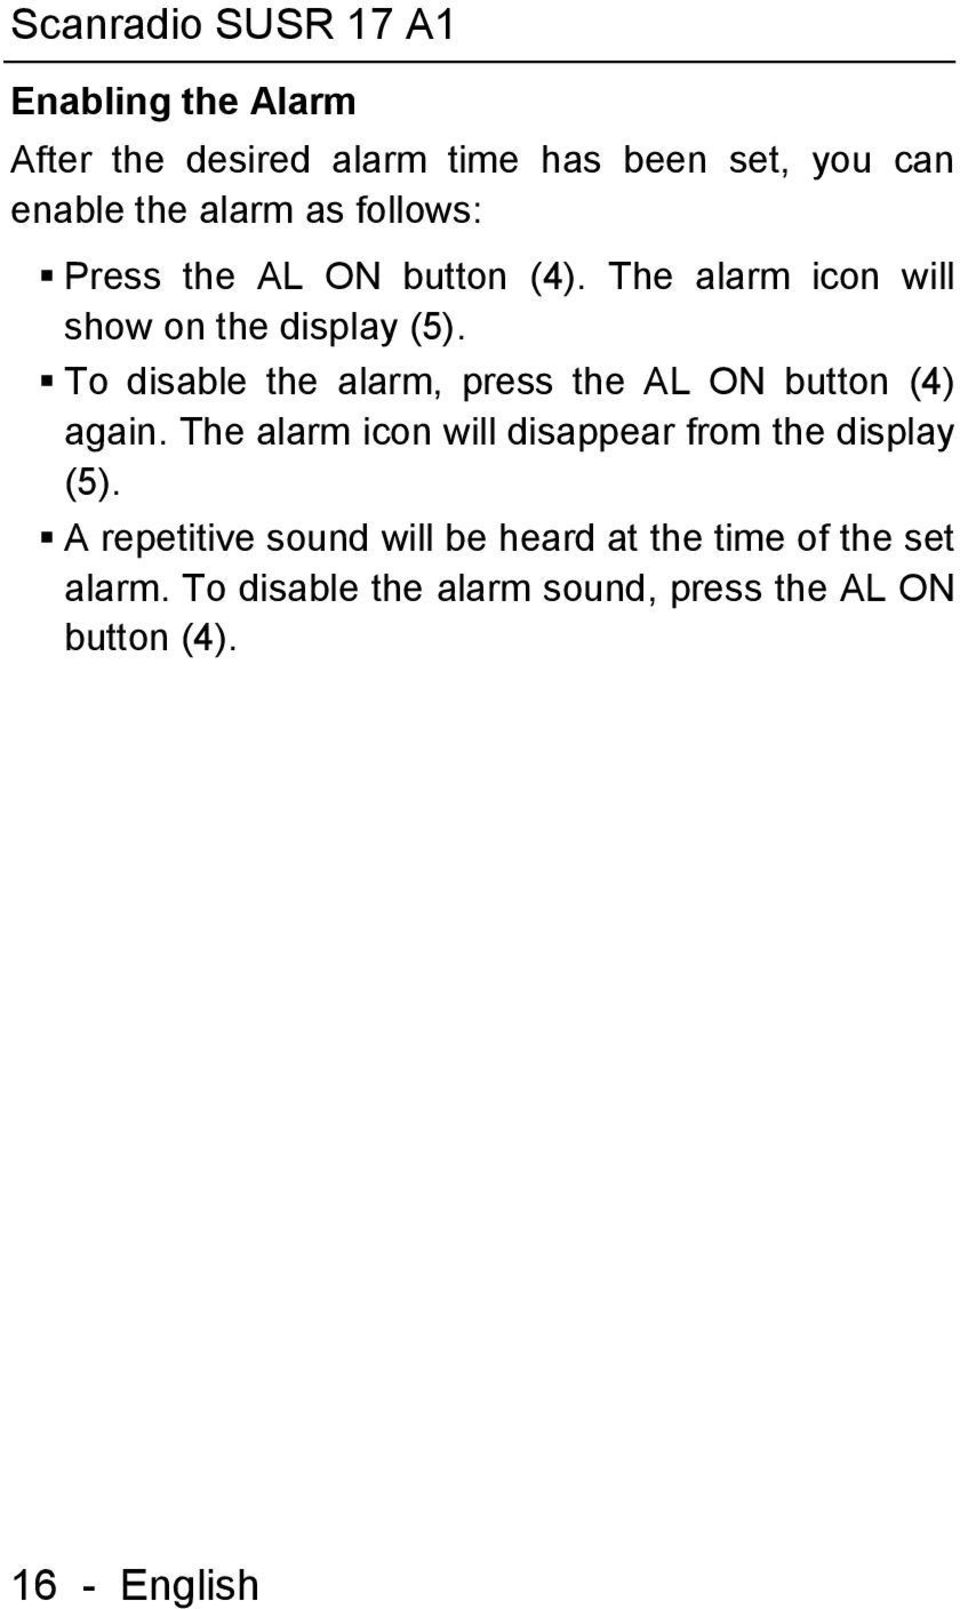 To disable the alarm, press the AL ON button (4) again.